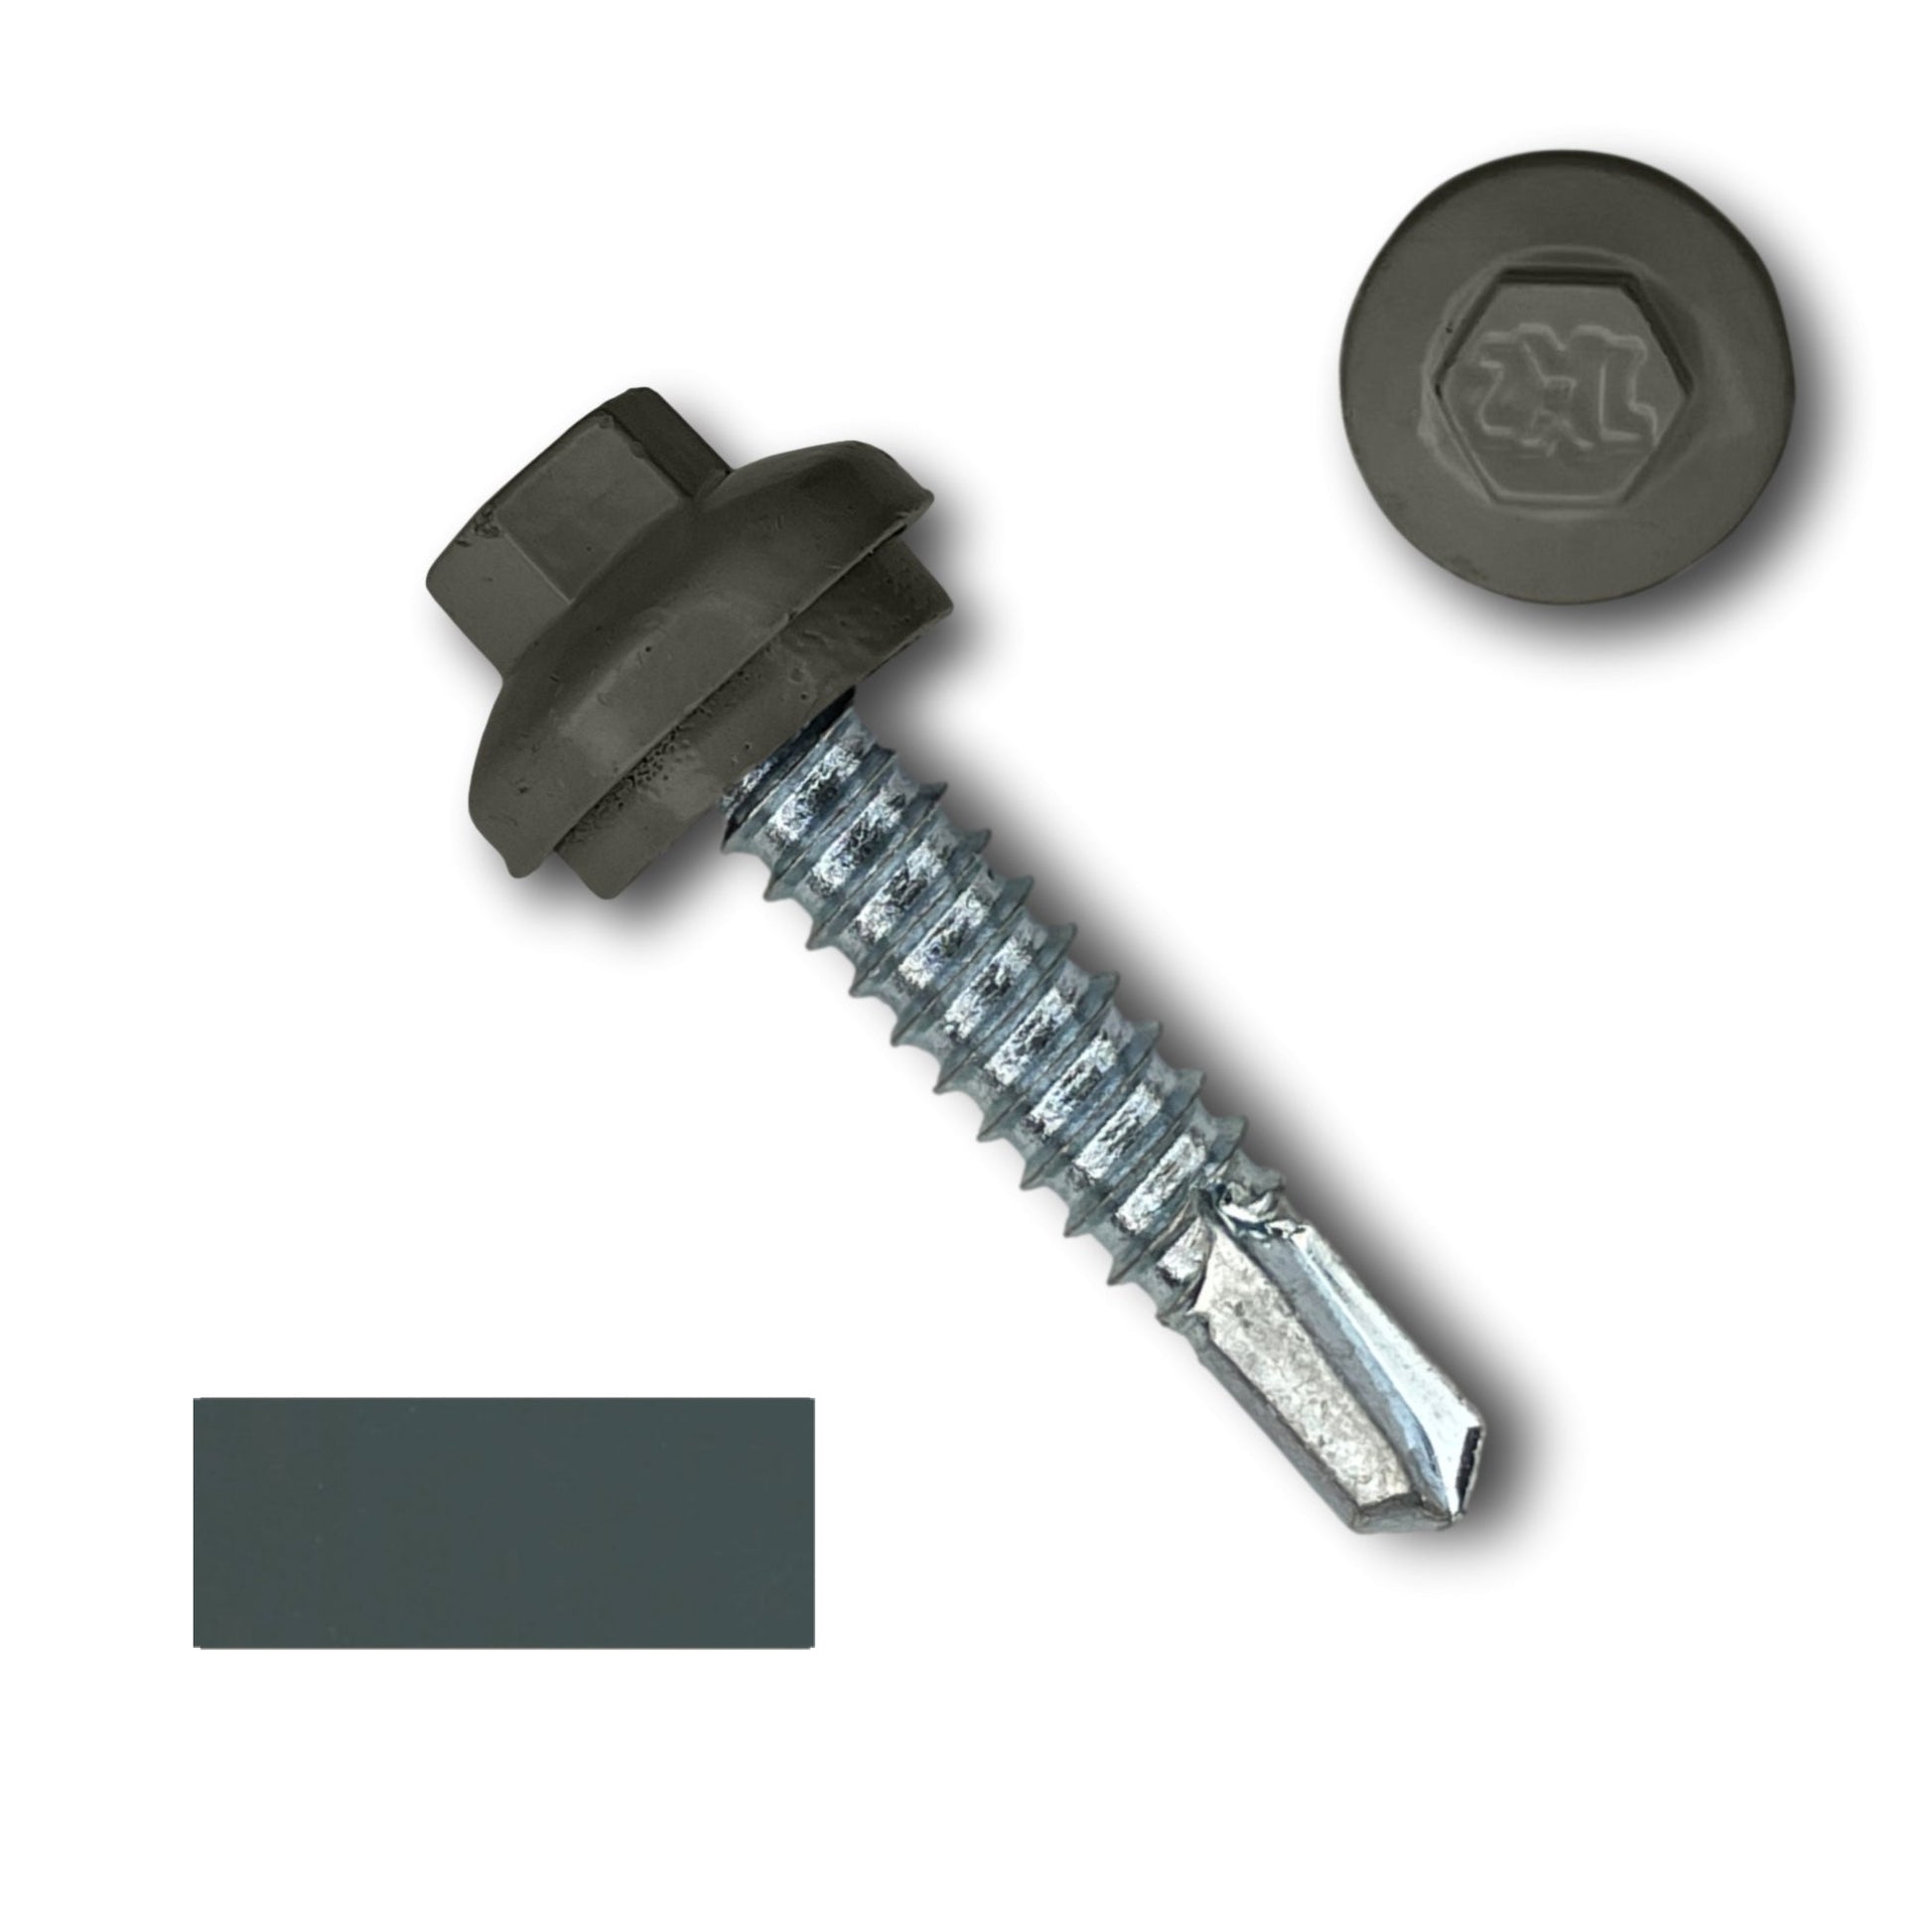 A close-up image of a Perma Cover #14 x 1.25" ZXL Dome Cap Metal Building Screw (Metal-to-Metal), Self-Drilling - 250, 500, or 1000 Pack with a black washer. To the upper right of the screw is a view of the head showing a hexagonal pattern. To the lower left is a small rectangular swatch, likely representing the screw's finish, commonly seen in metal building screws.